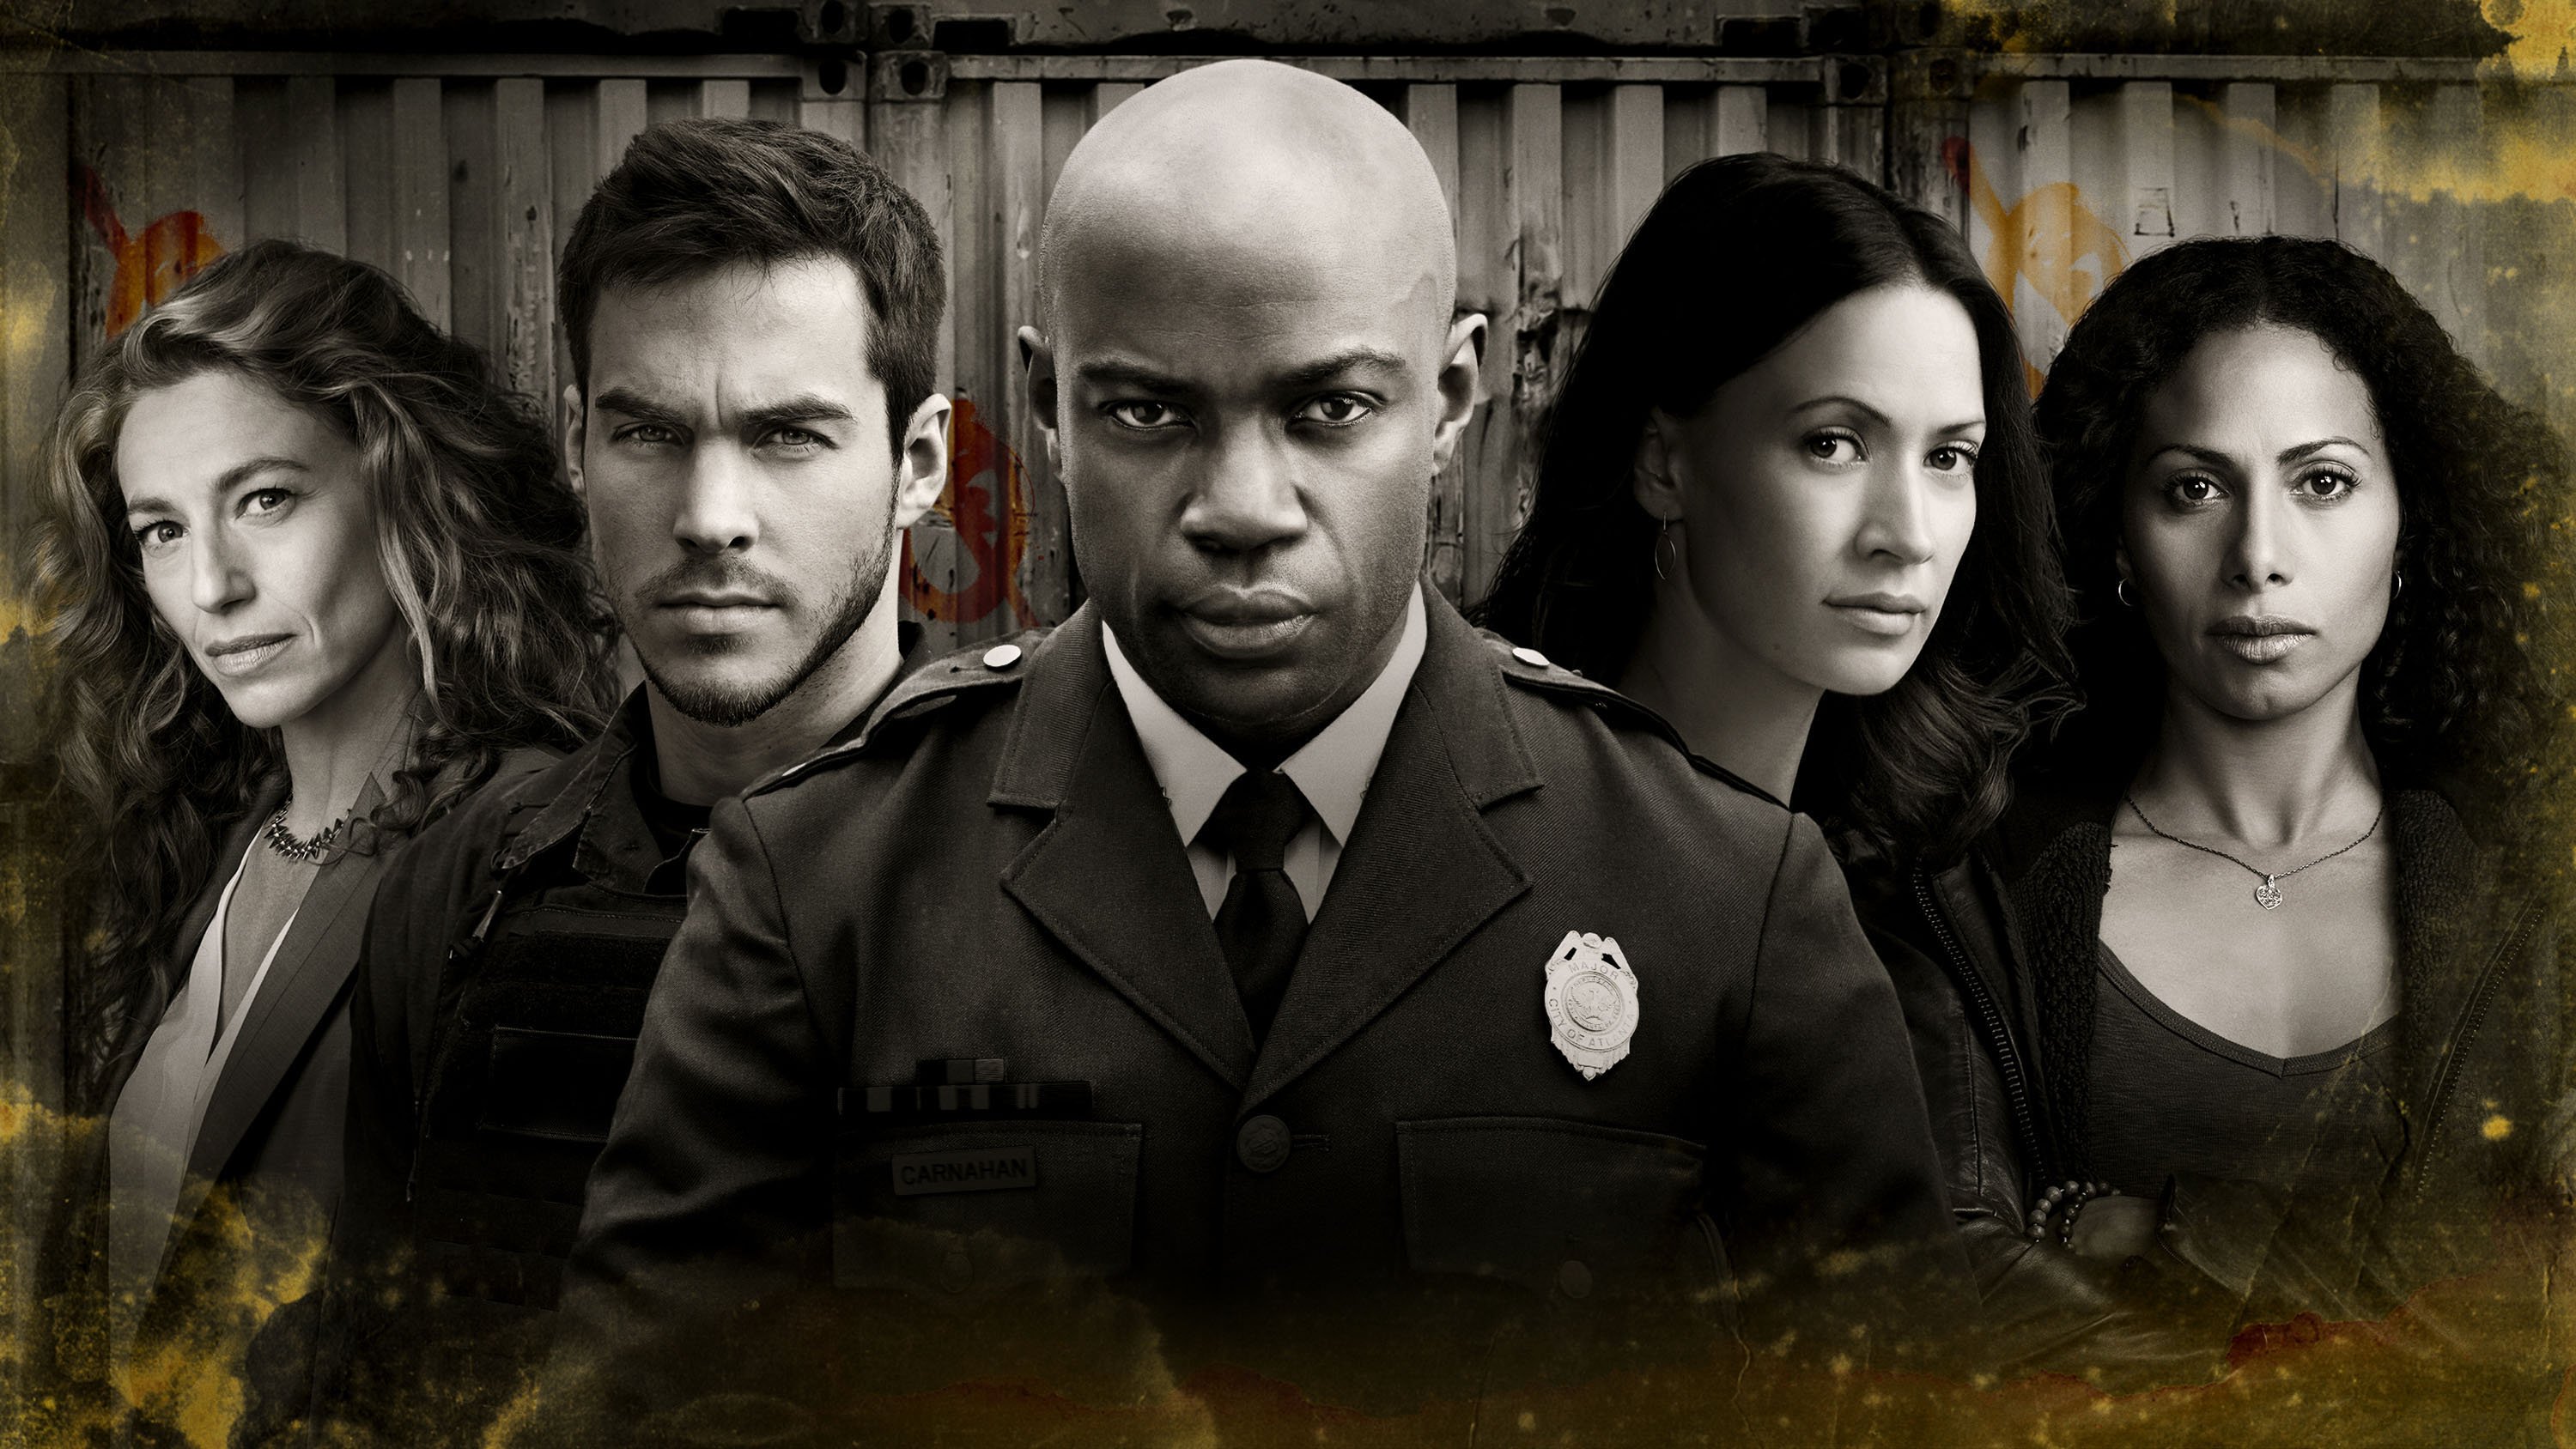 "Containment" premieres Tuesday, April 19, at 9/8c on The CW. (L-R) Series stars Claudia Black, Chris Wood, David Gyasi, Kristen Gutoskie, Christina Moses. (© 2016 WBEI All Rights Reserved.)